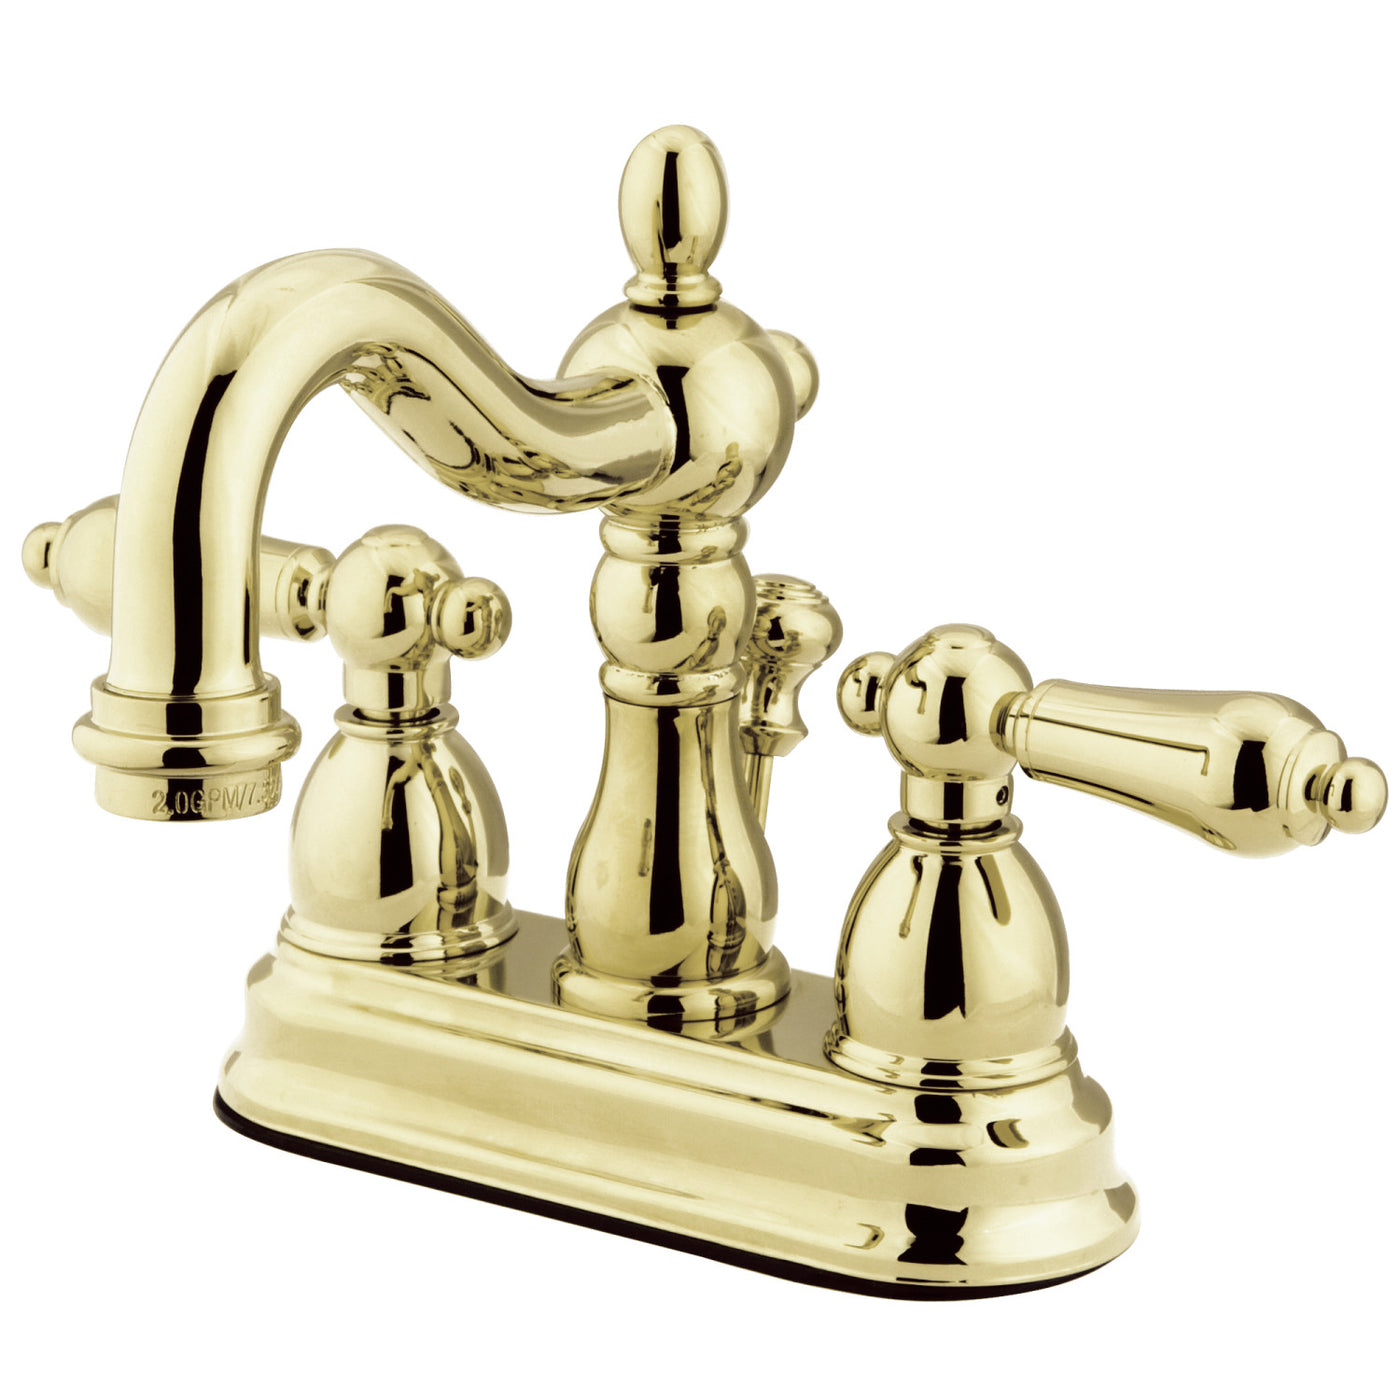 Elements of Design EB1602AL 4-Inch Centerset Bathroom Faucet with Plastic Pop-Up, Polished Brass